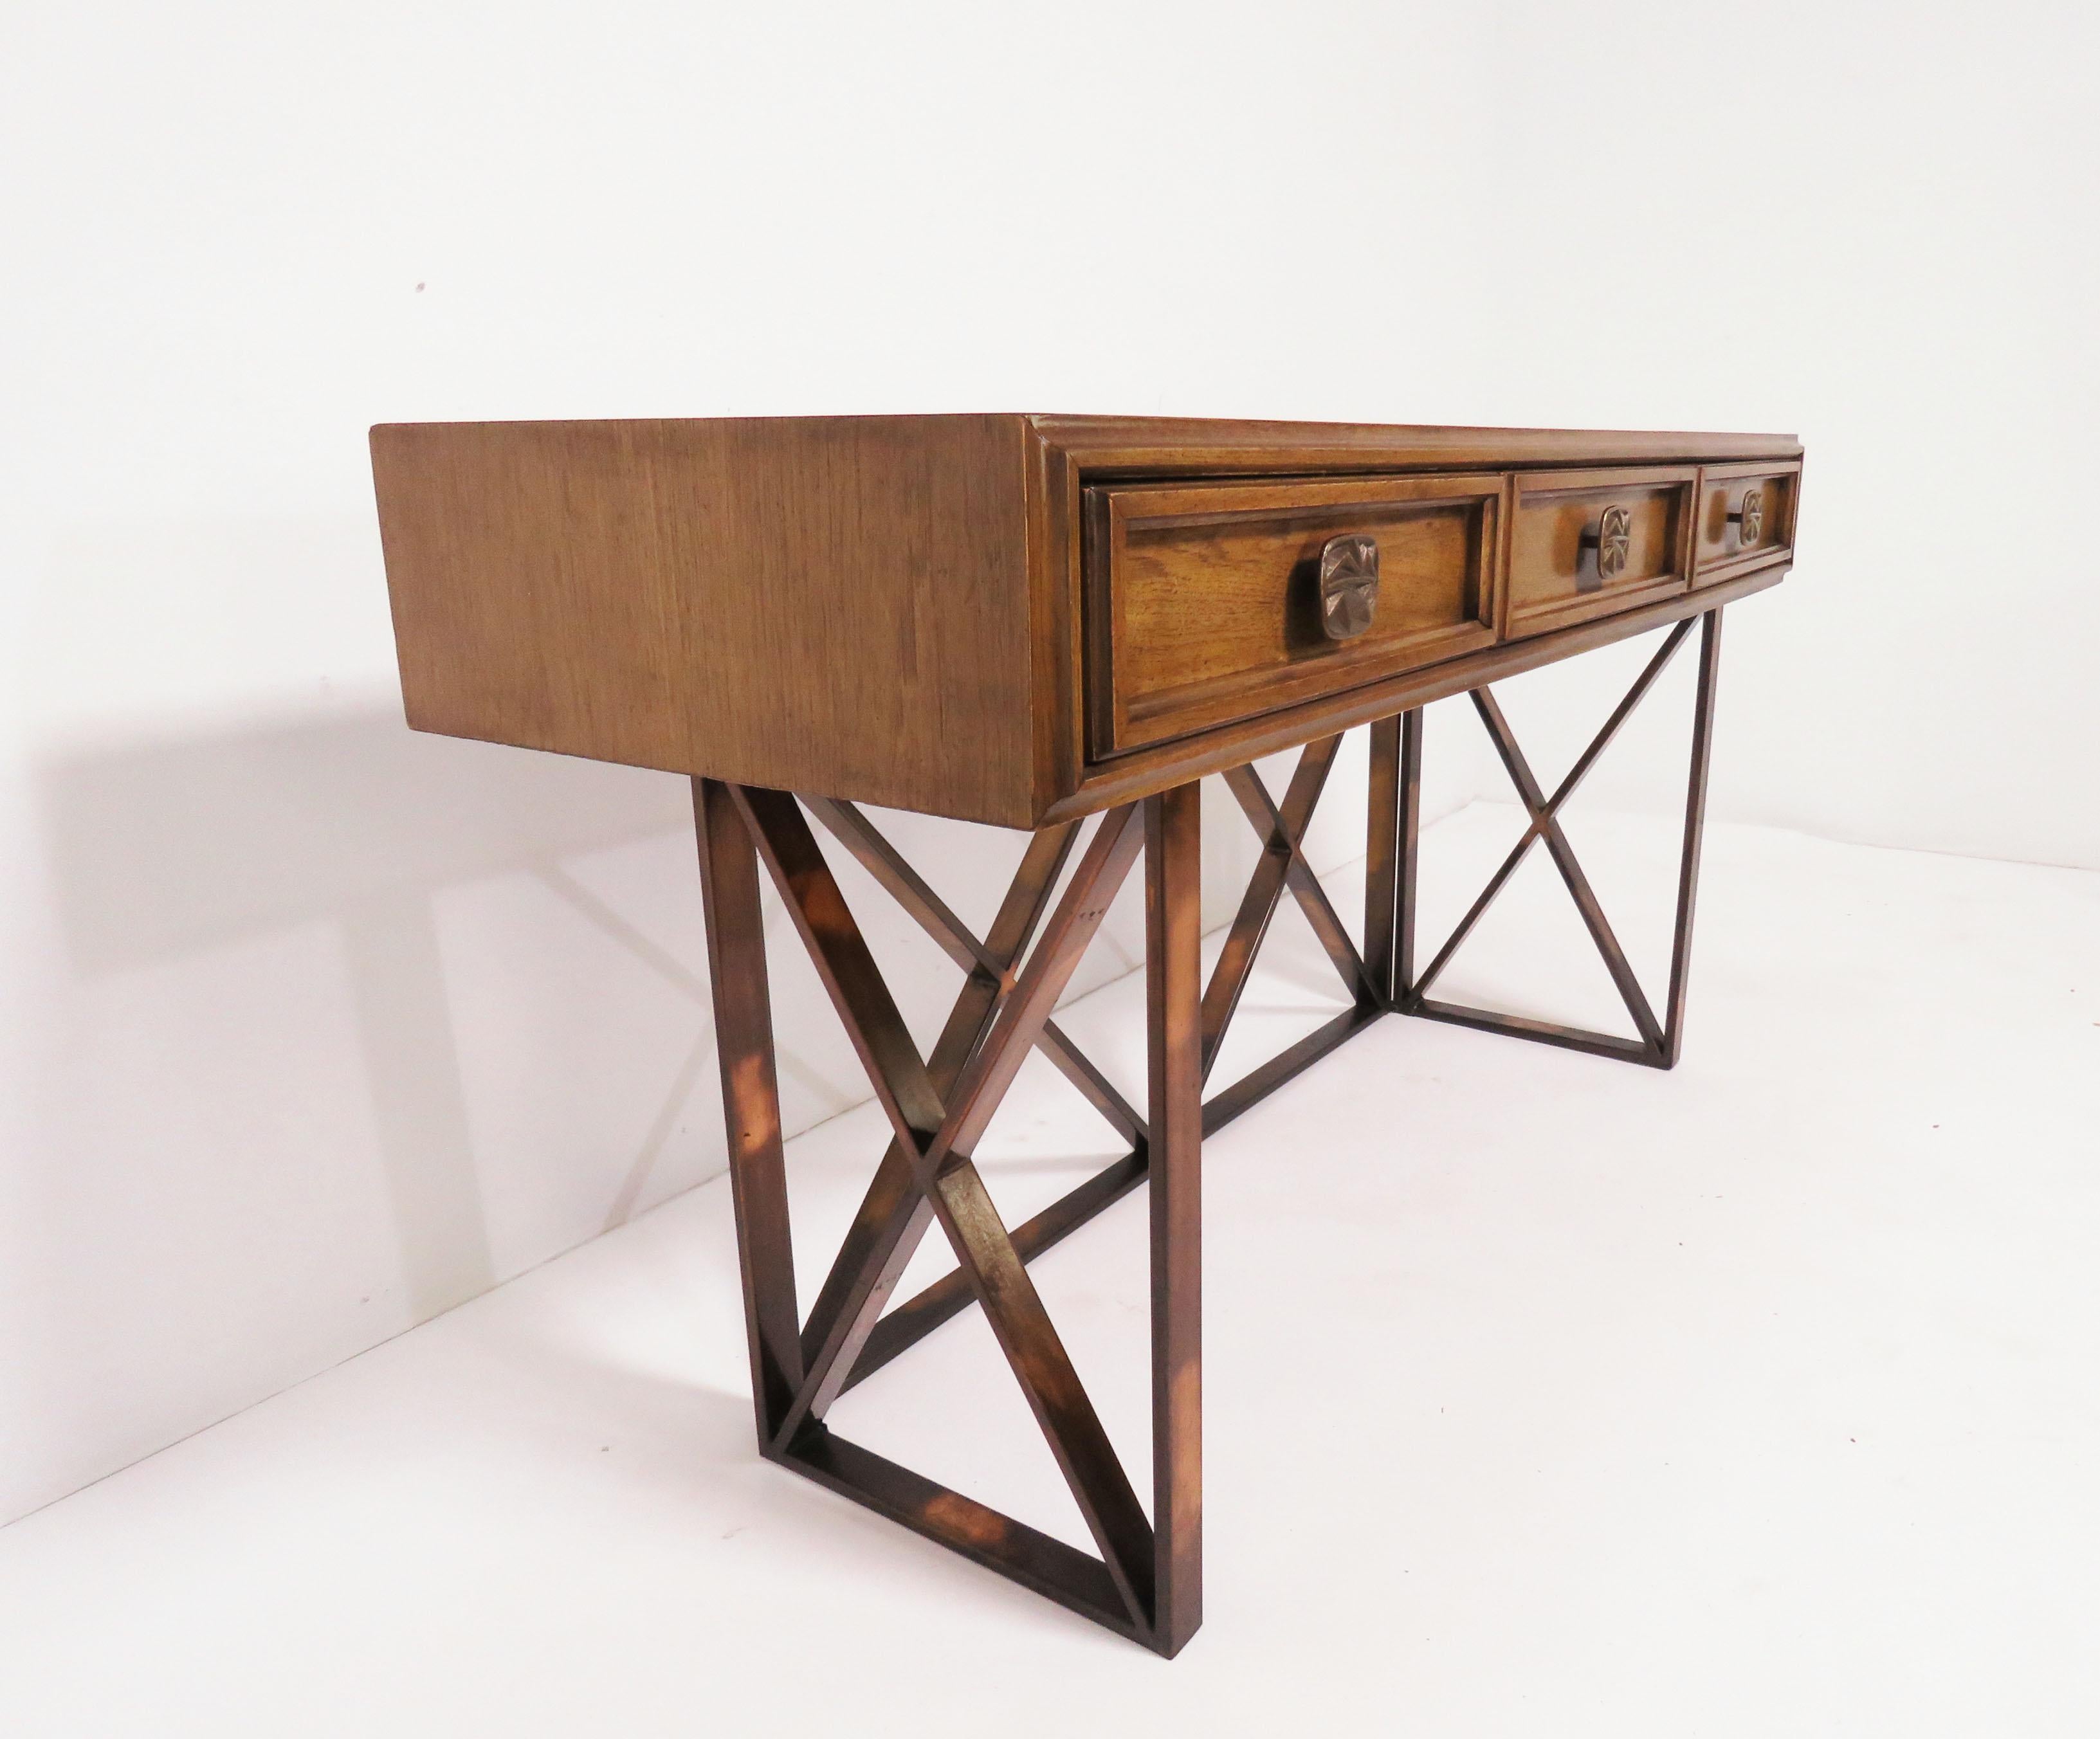 An American midcentury walnut console table of three drawers with modernist bronzed pulls, supported on an X-form caged bronzed base with copper highlights. At desk height (29”), this would work well as a hallway or foyer table. Measures: 56” long,